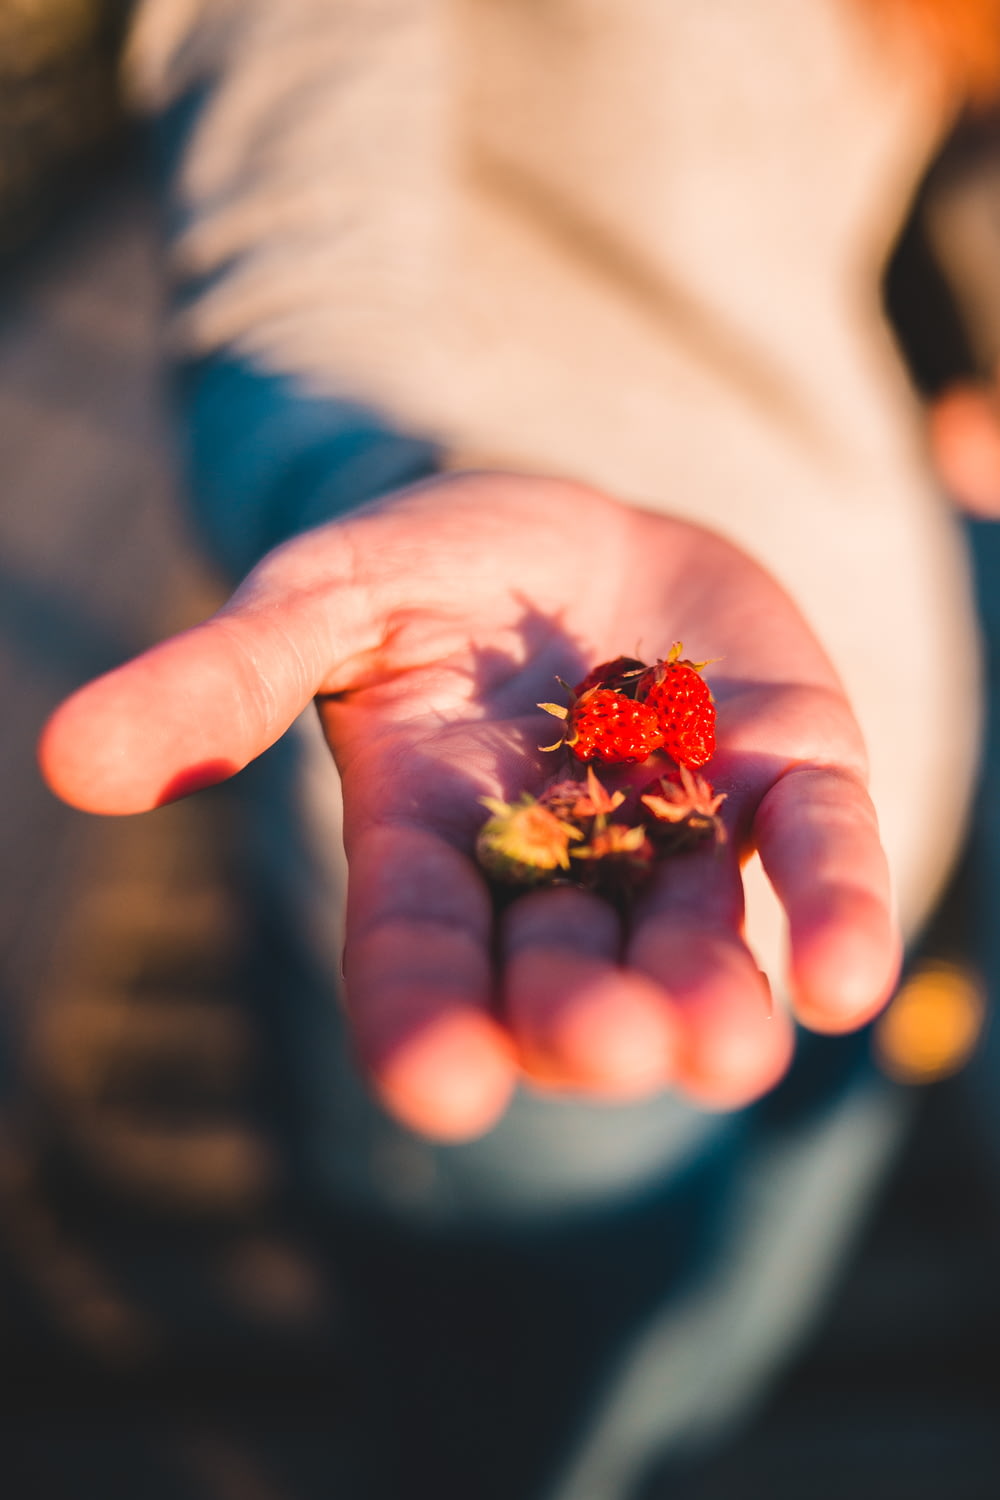 red and yellow flower on persons hand